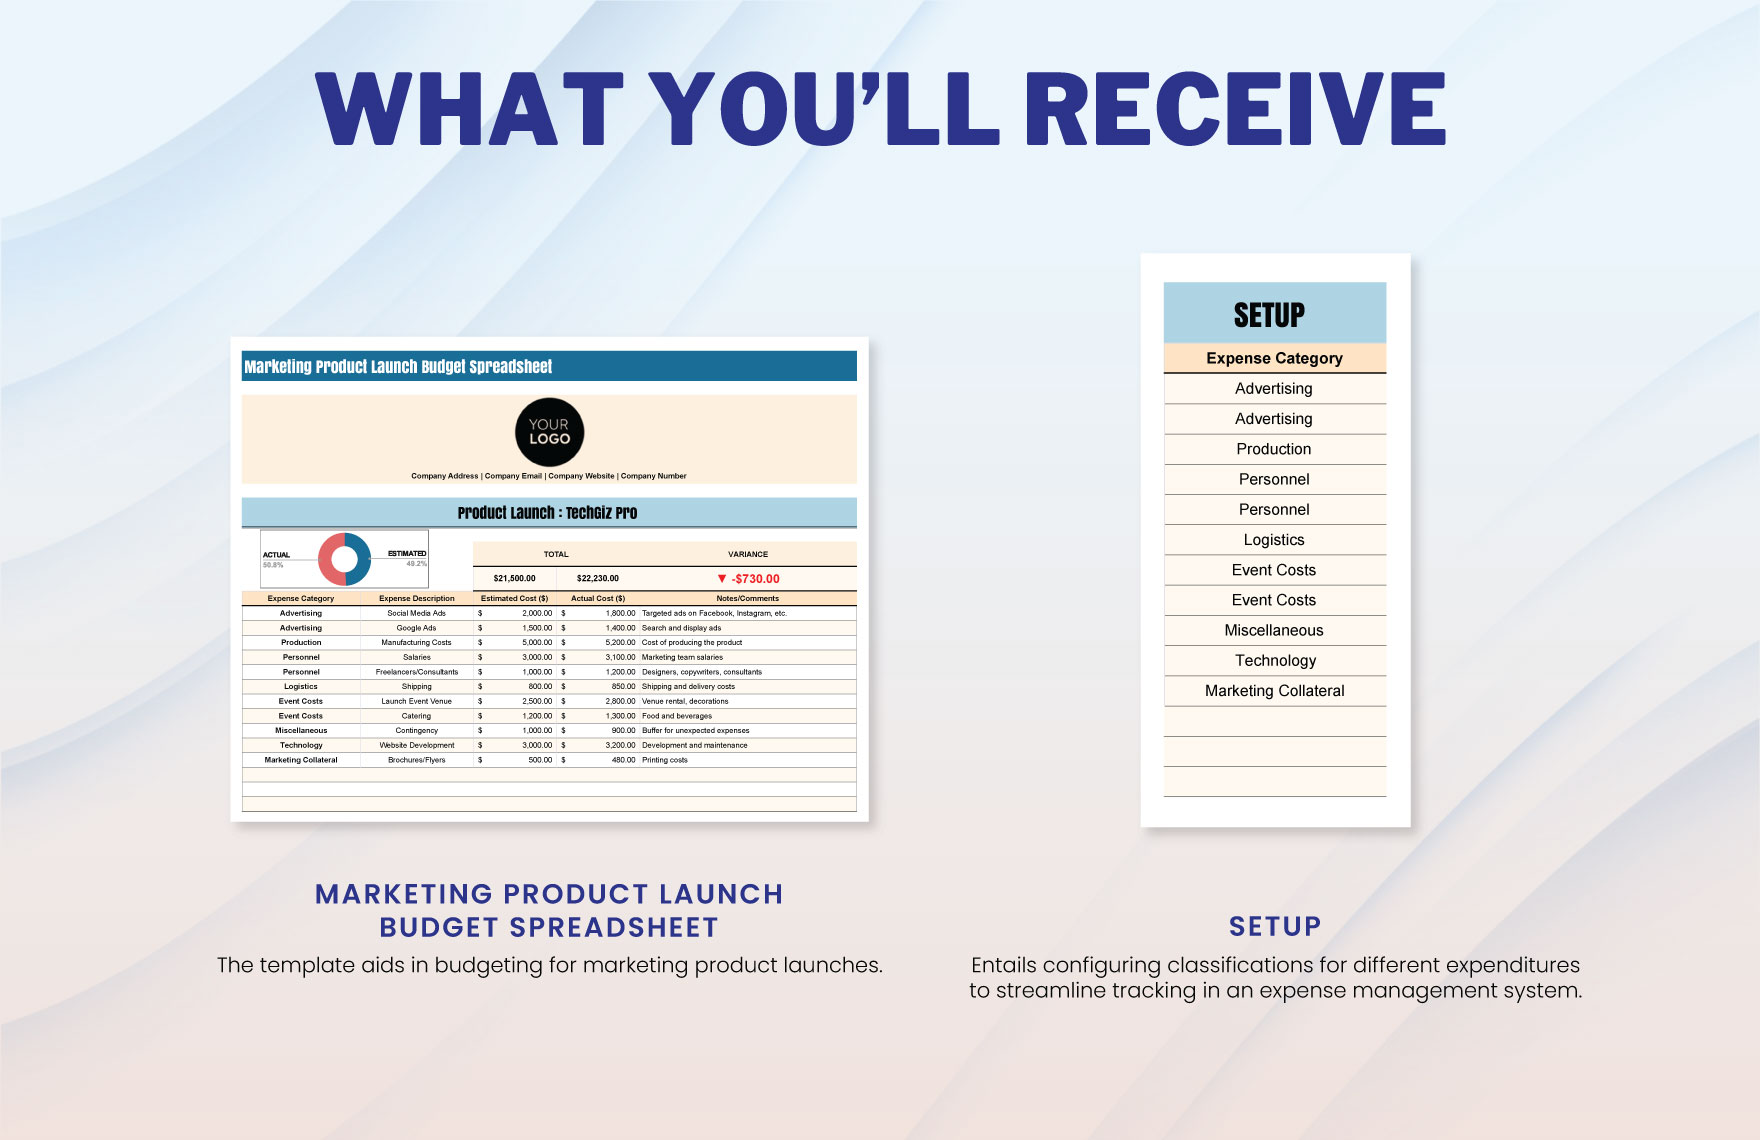 Marketing Product Launch Budget Spreadsheet Template